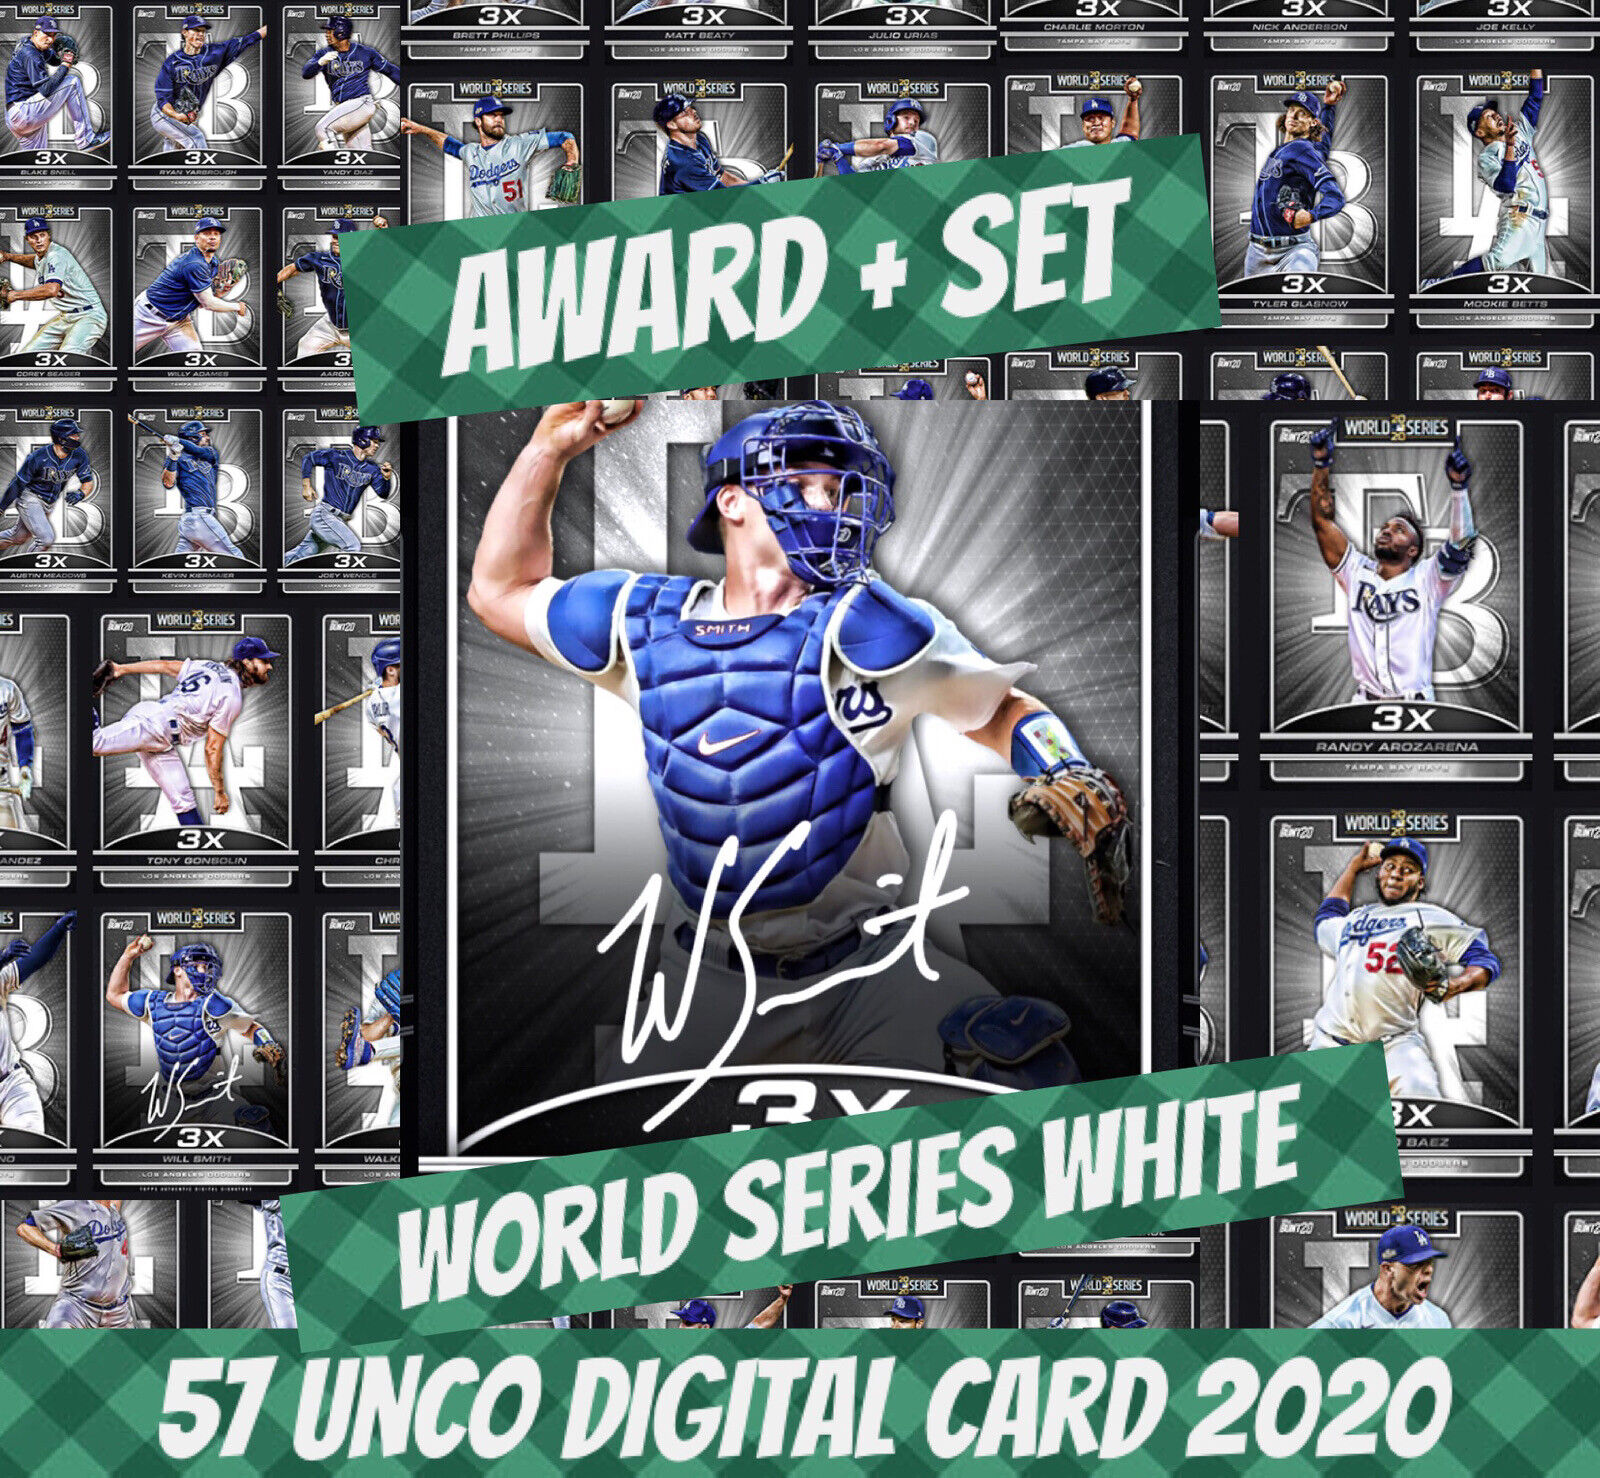 2020 Topps Colorful Will Smith Unco Award + Set (1+56) World Series White Digital